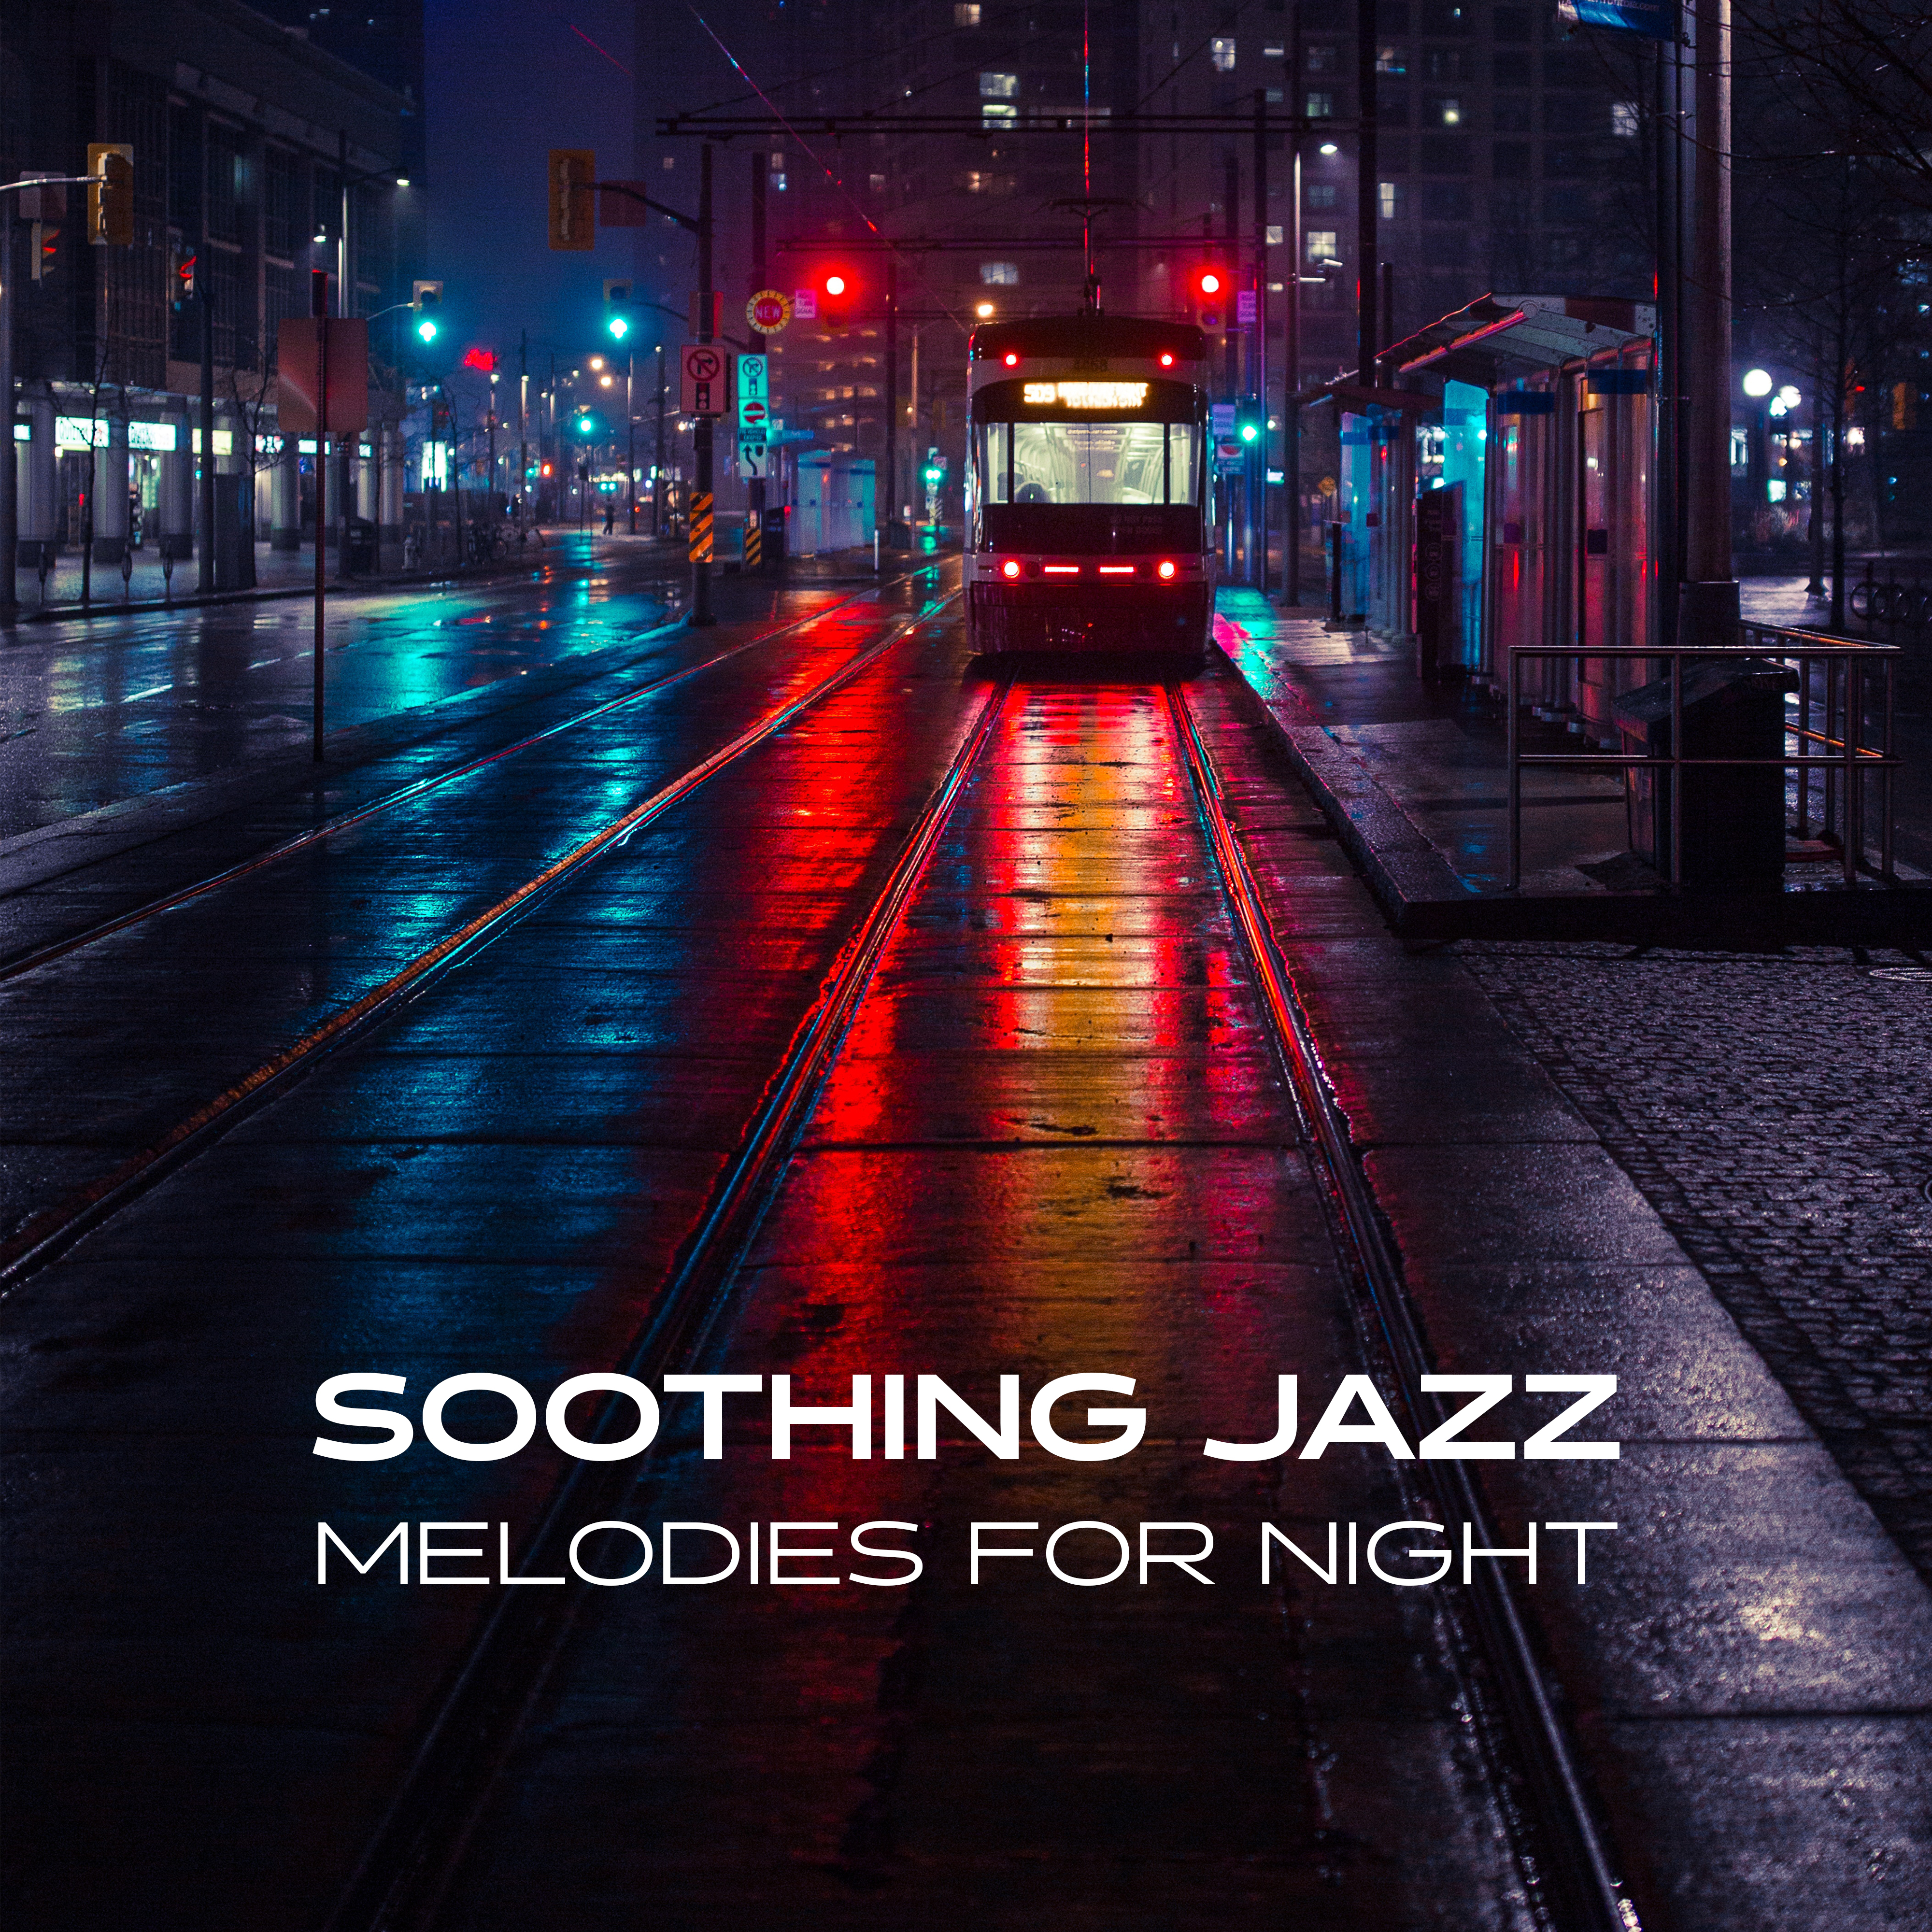 Soothing Jazz Melodies for Night